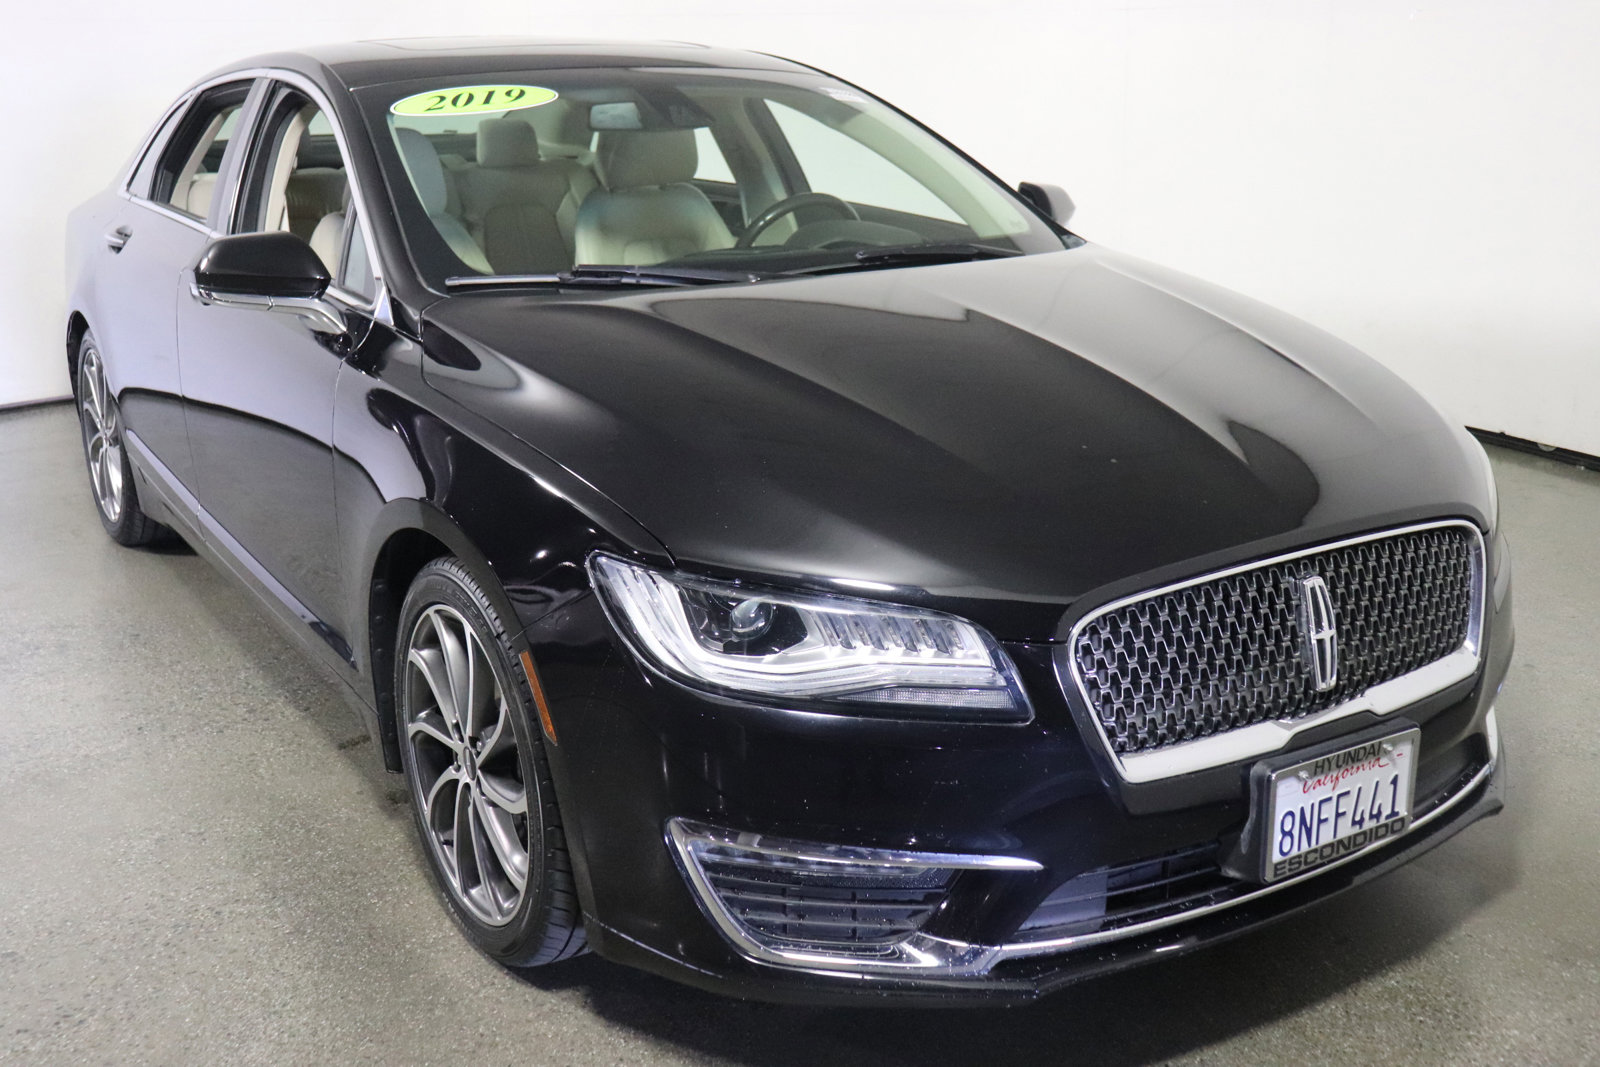 Used Lincoln MKZ Hybrid for Sale in San Diego, CA - Autotrader